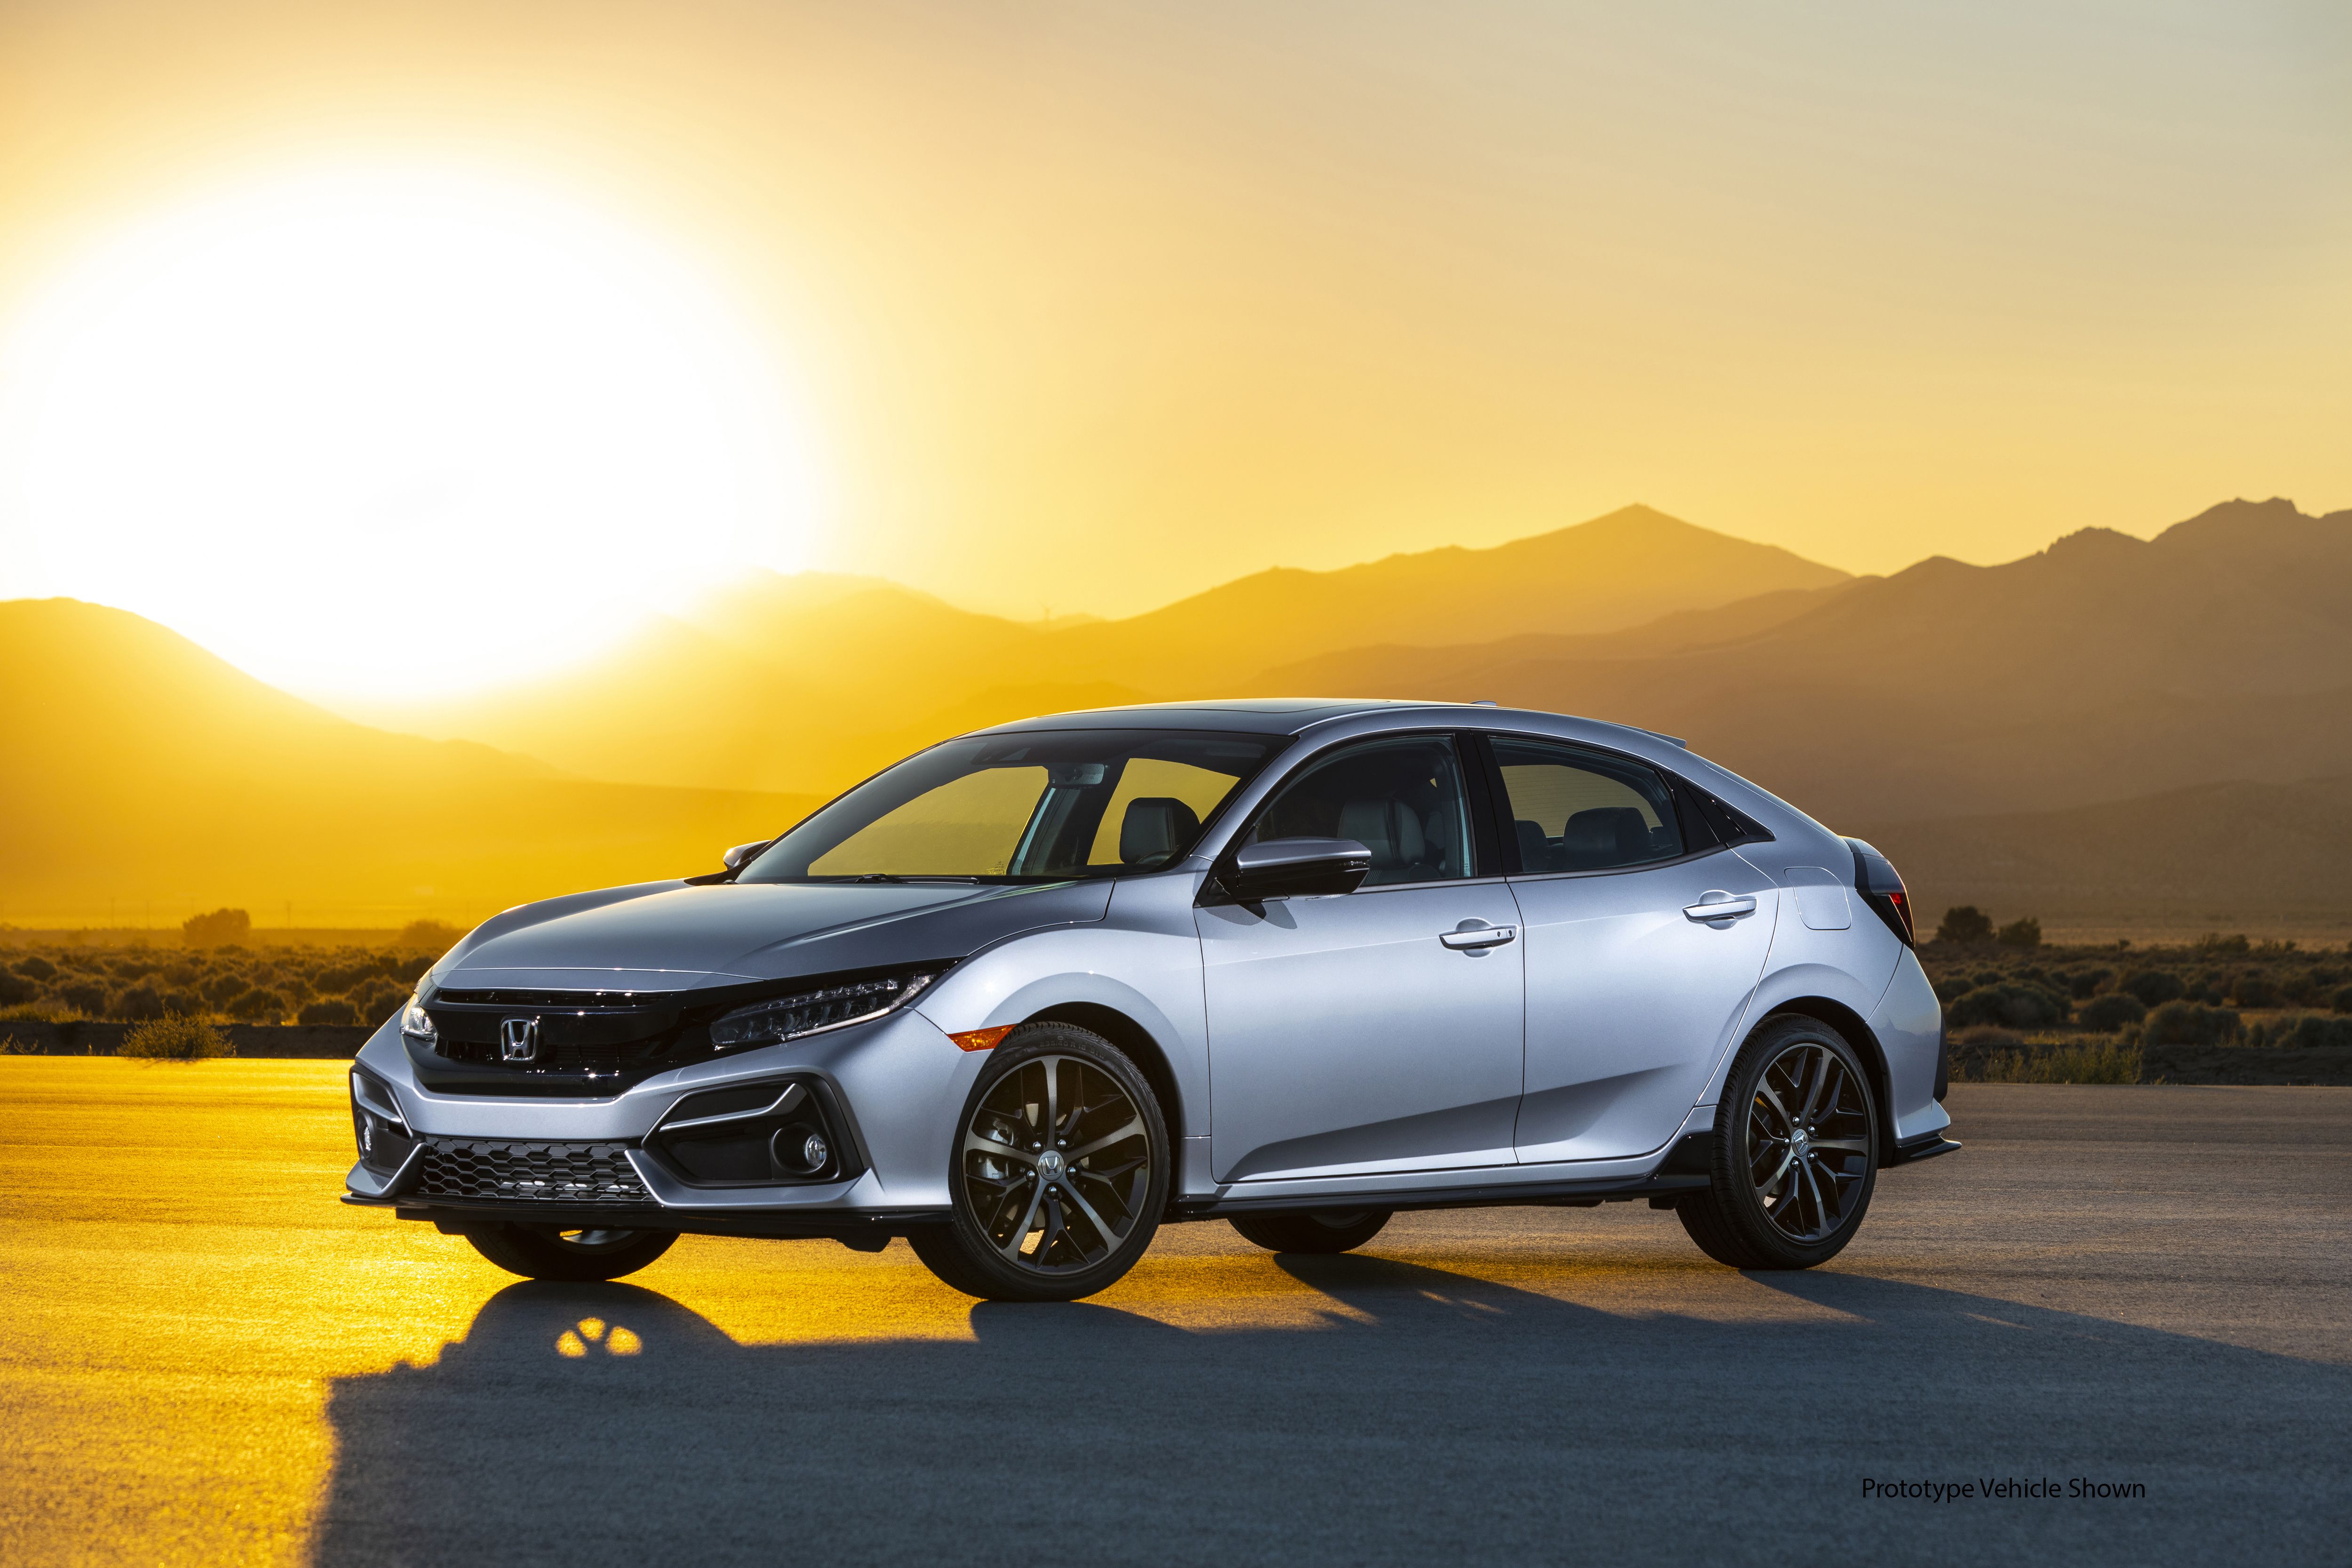 Honda Civic Review. Price, specs, features and photo